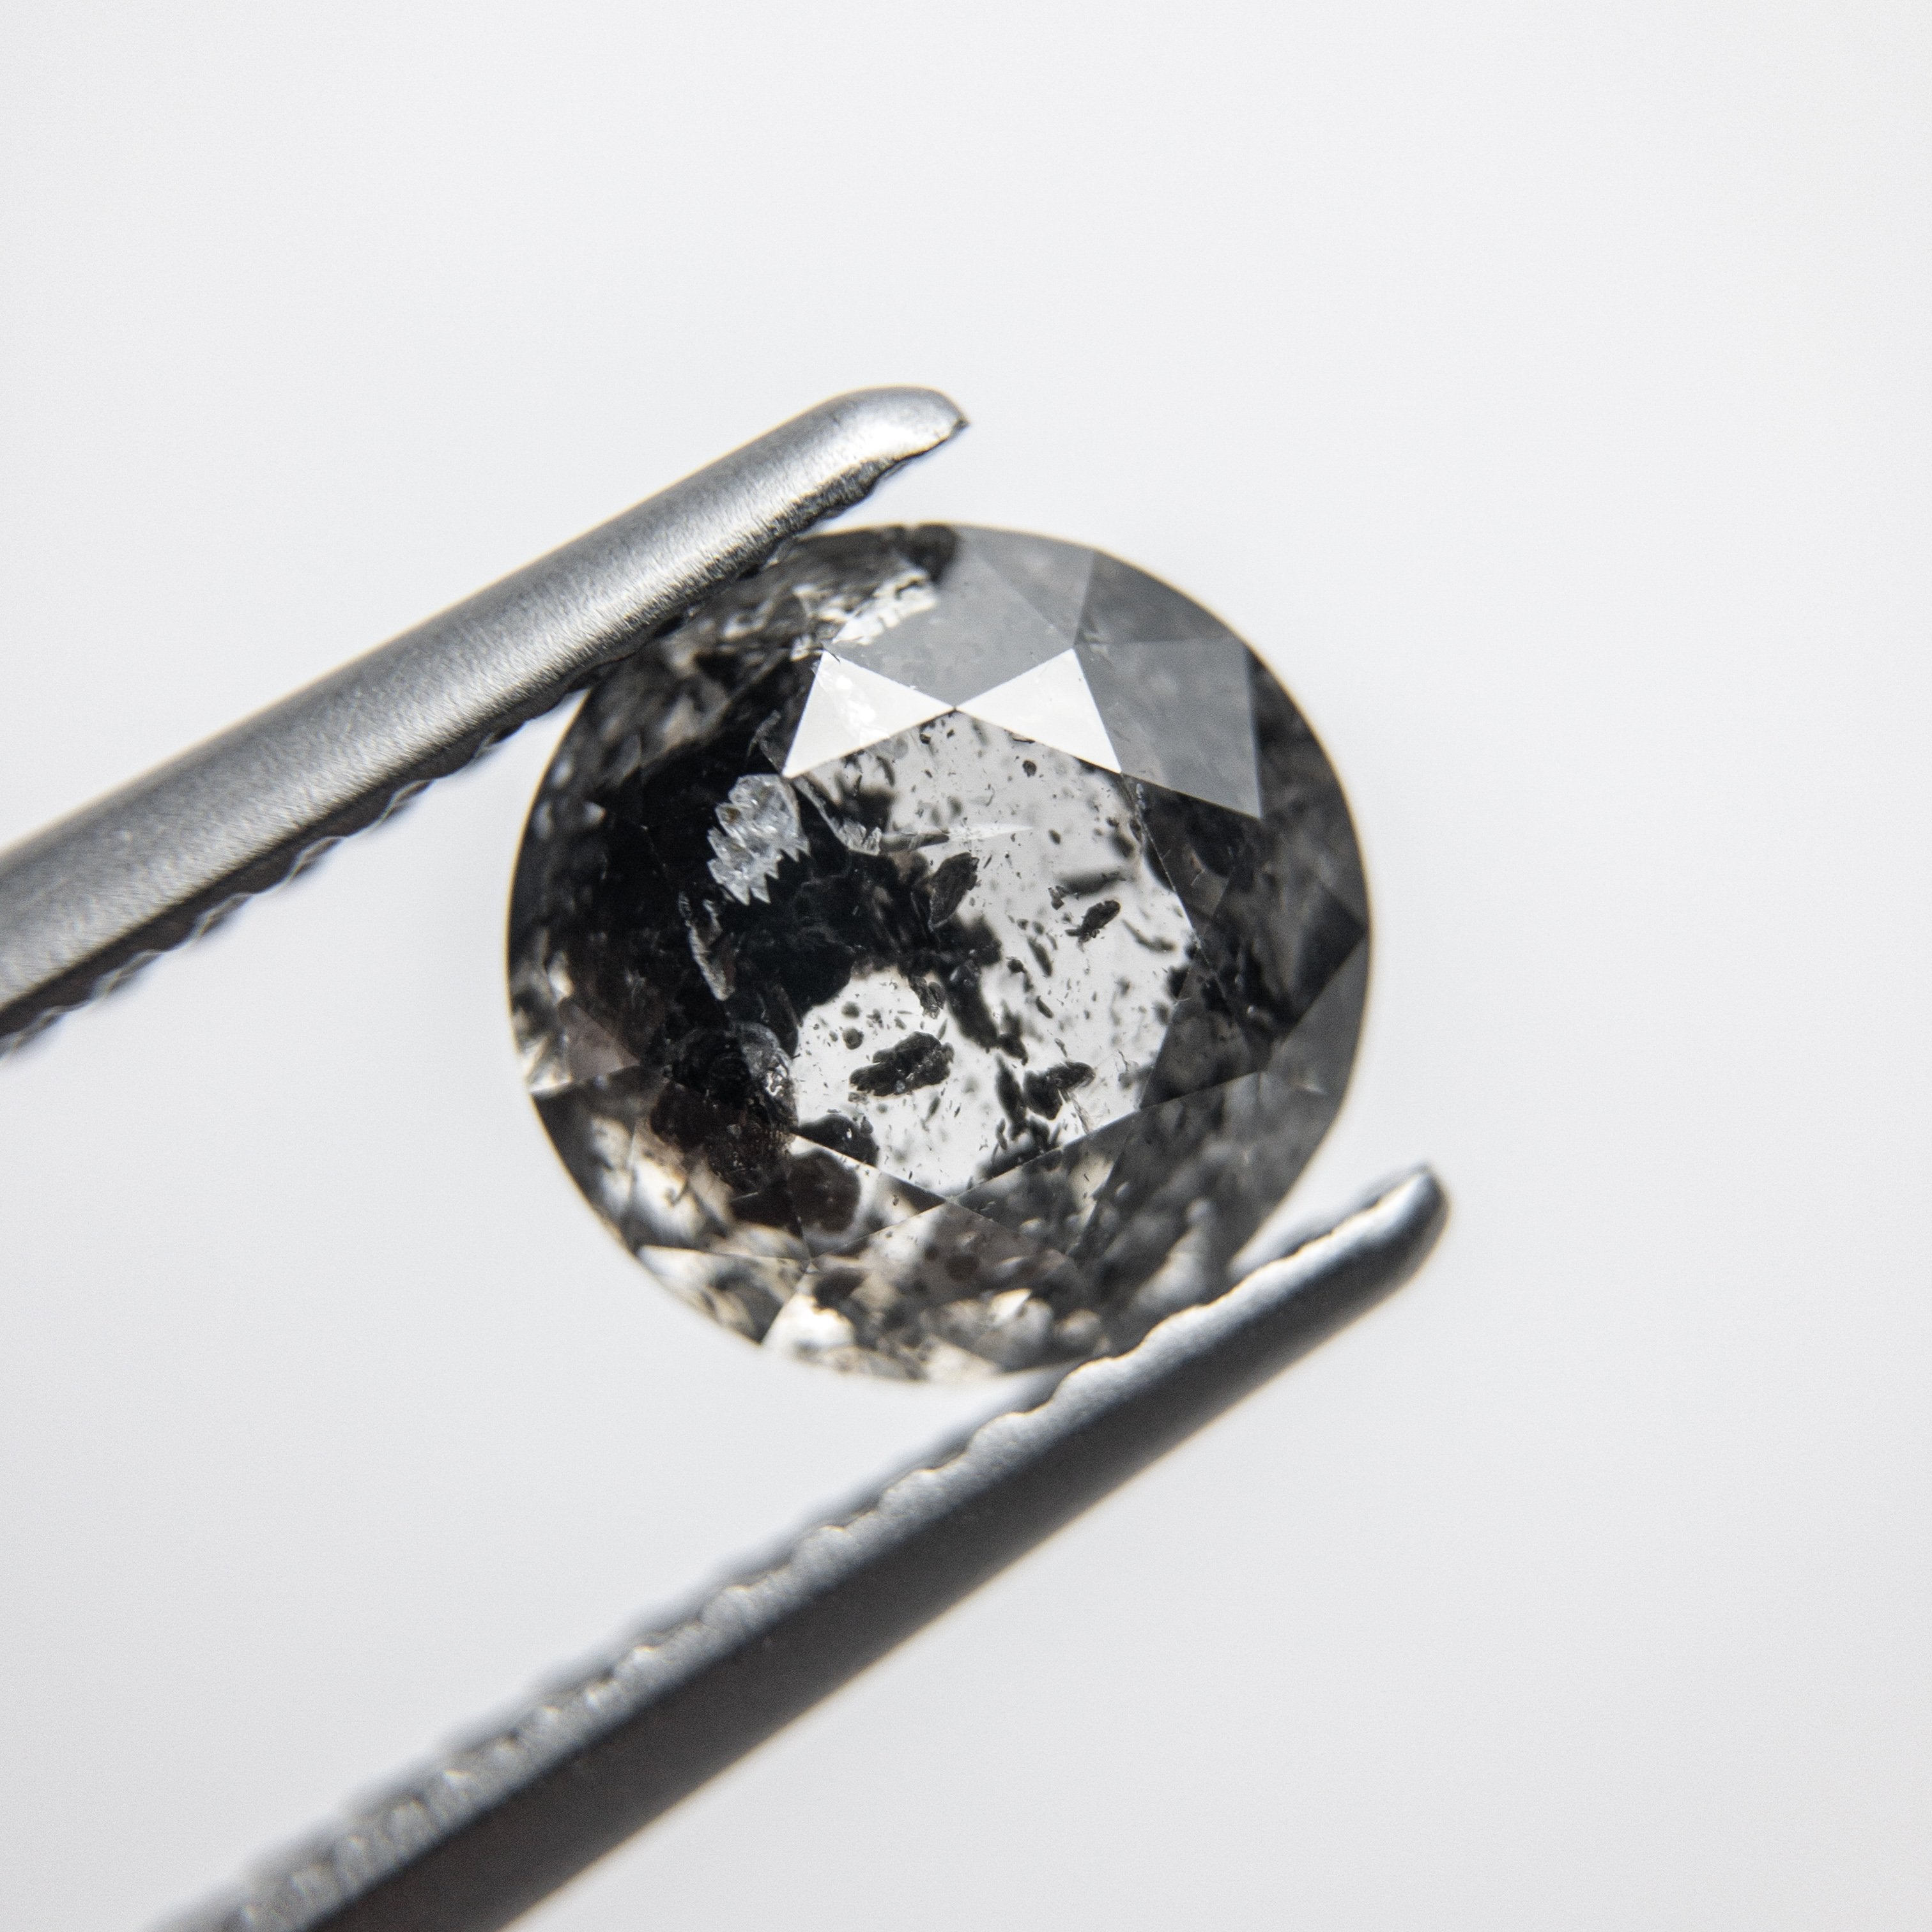 1.54ct 7.31x7.22x3.67mm Round Double Cut 18094-12 HOLD 05.21.20 D703